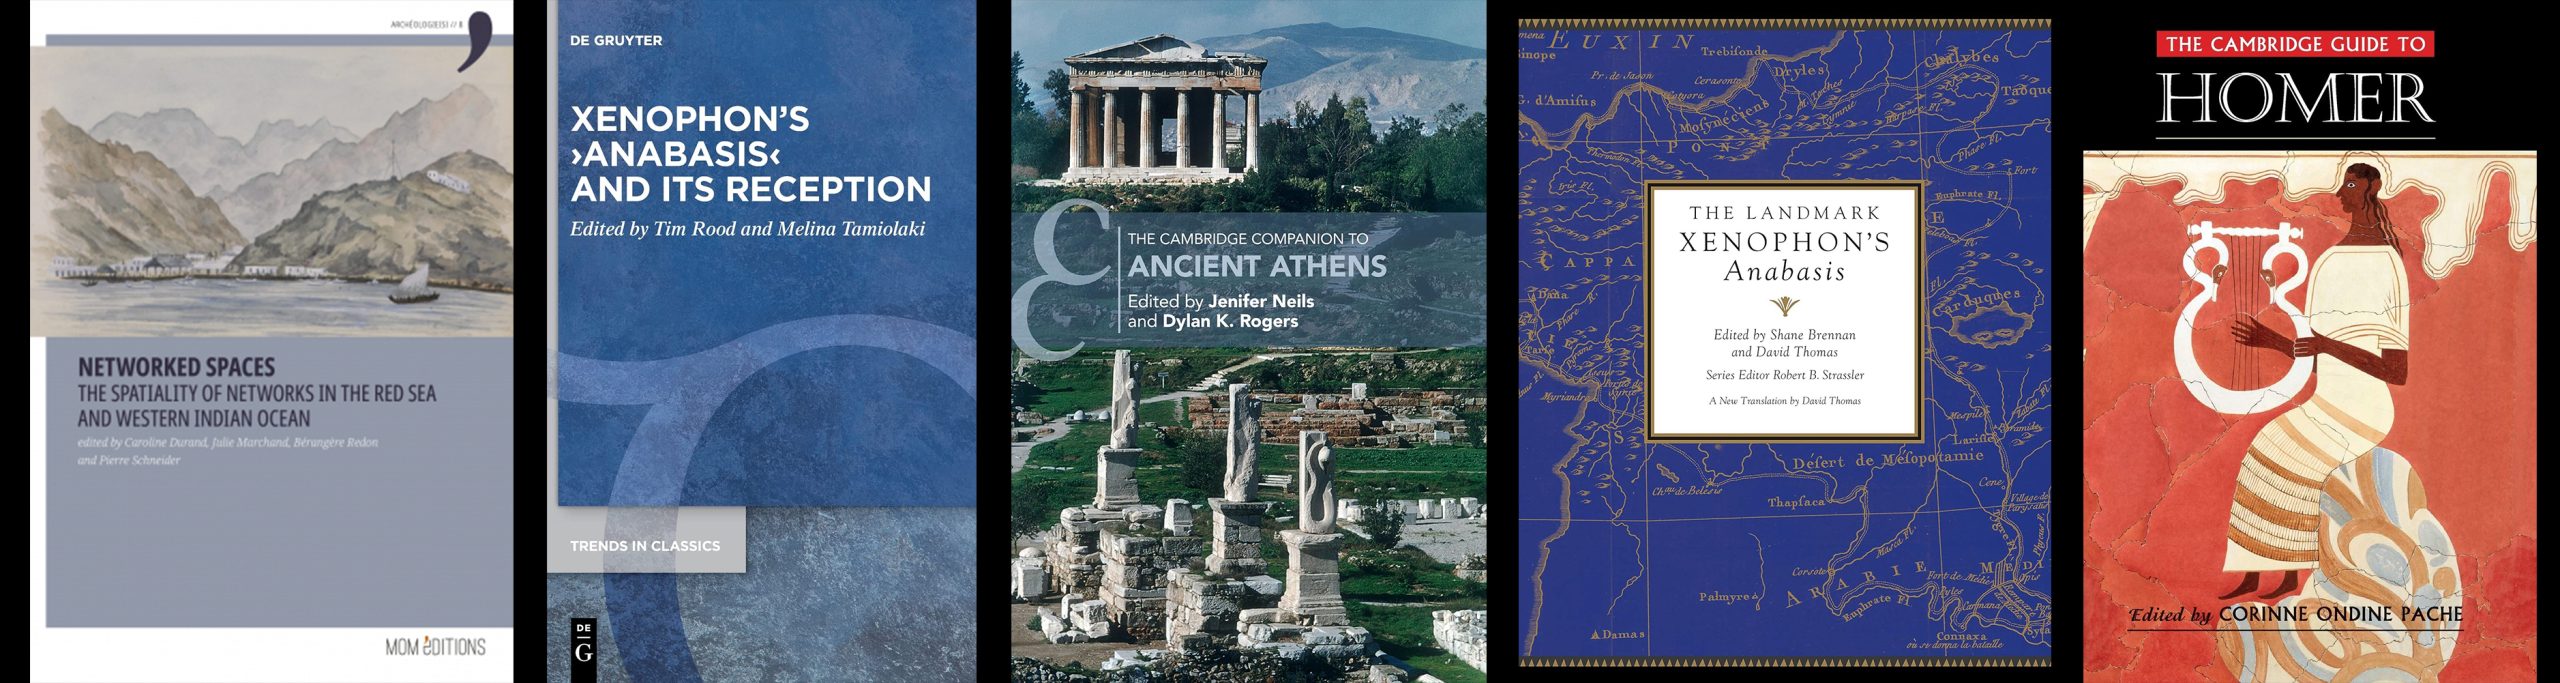 1. Networked Spaces: The Spatiality of Networks in the Red Sea and Western Indian Ocean. 2. Xenophon's Anabasis and its Receiption, edited by Tim Rood and Melina Tamiolaki. 3. The Cambridge Companion to Ancient Athens, edited by Jenifer Neils and Dylan K. Rogers. 4. The Landmark: Xenophon's Anabasis. 5. The Cambridge Guide to Homer, edited by Corrine Ondine Fache.